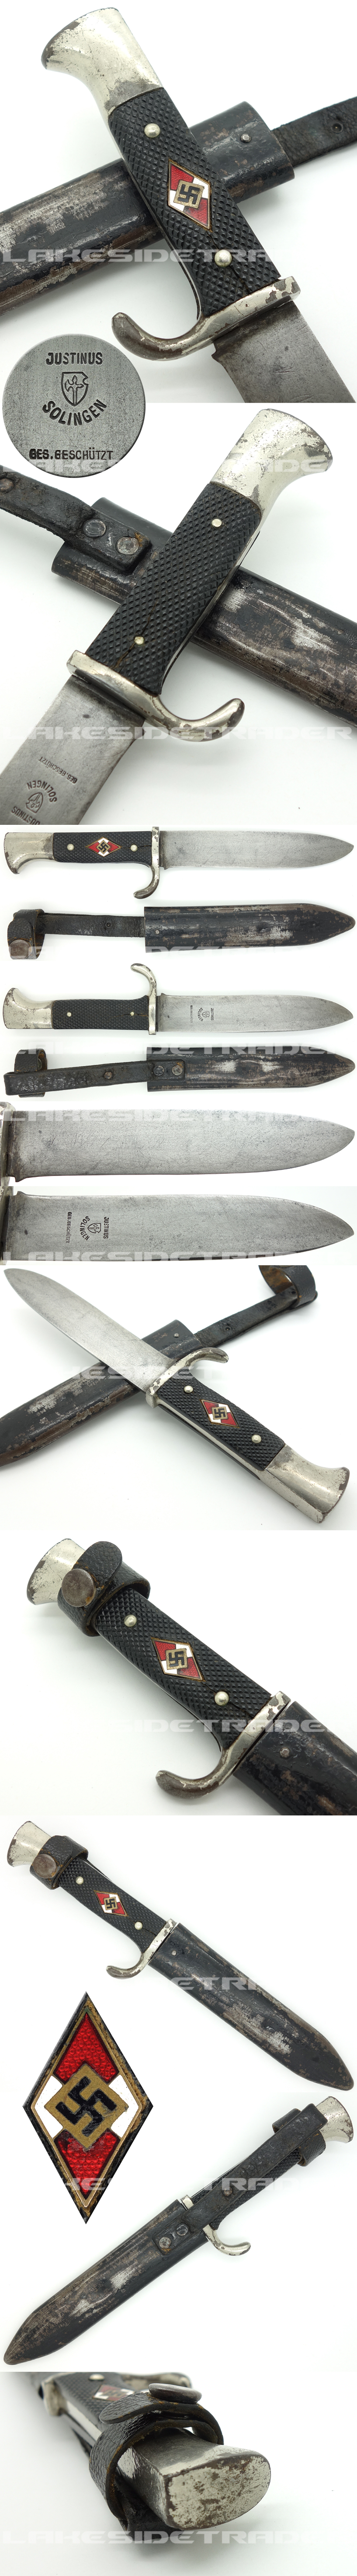 Early Hitler Youth Knife by Justinuswerk